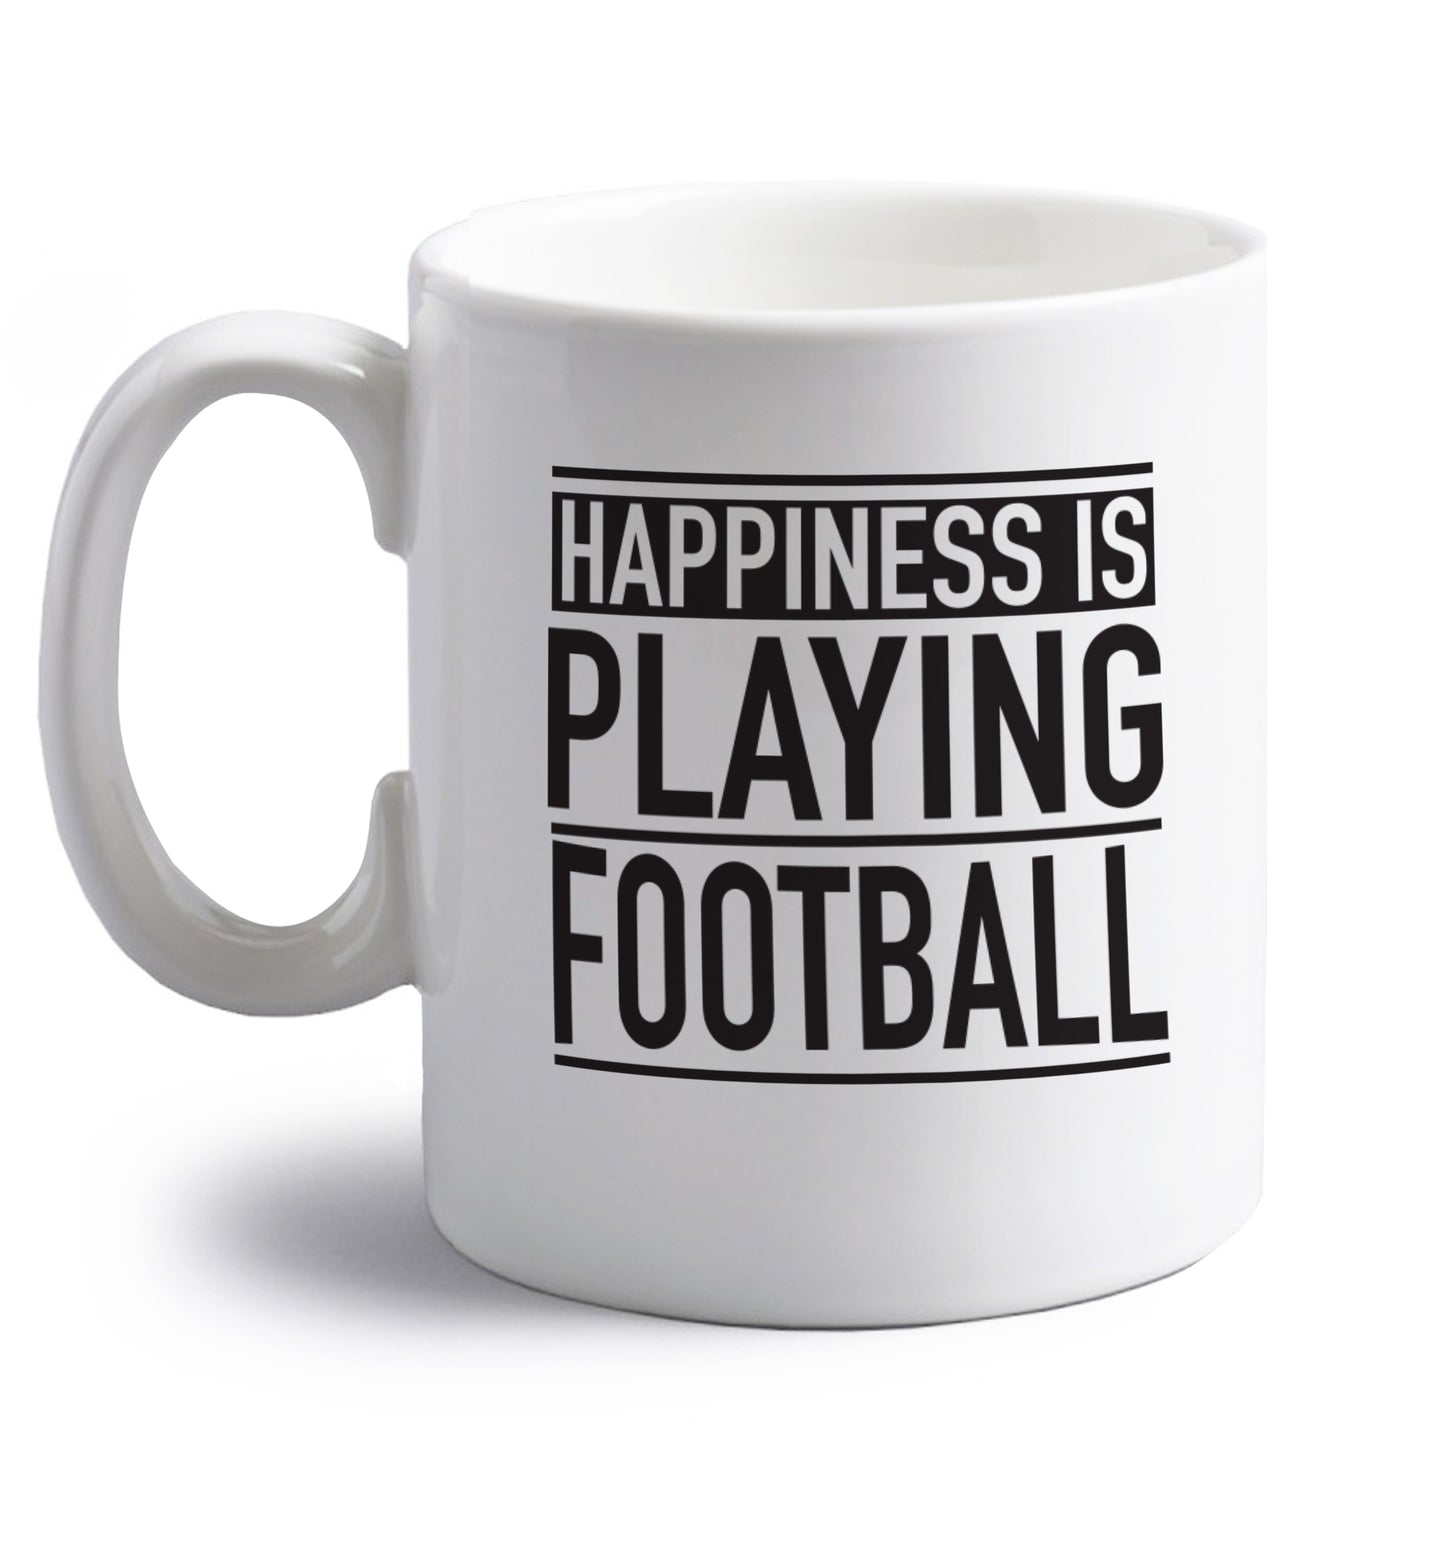 Happiness is playing football right handed white ceramic mug 